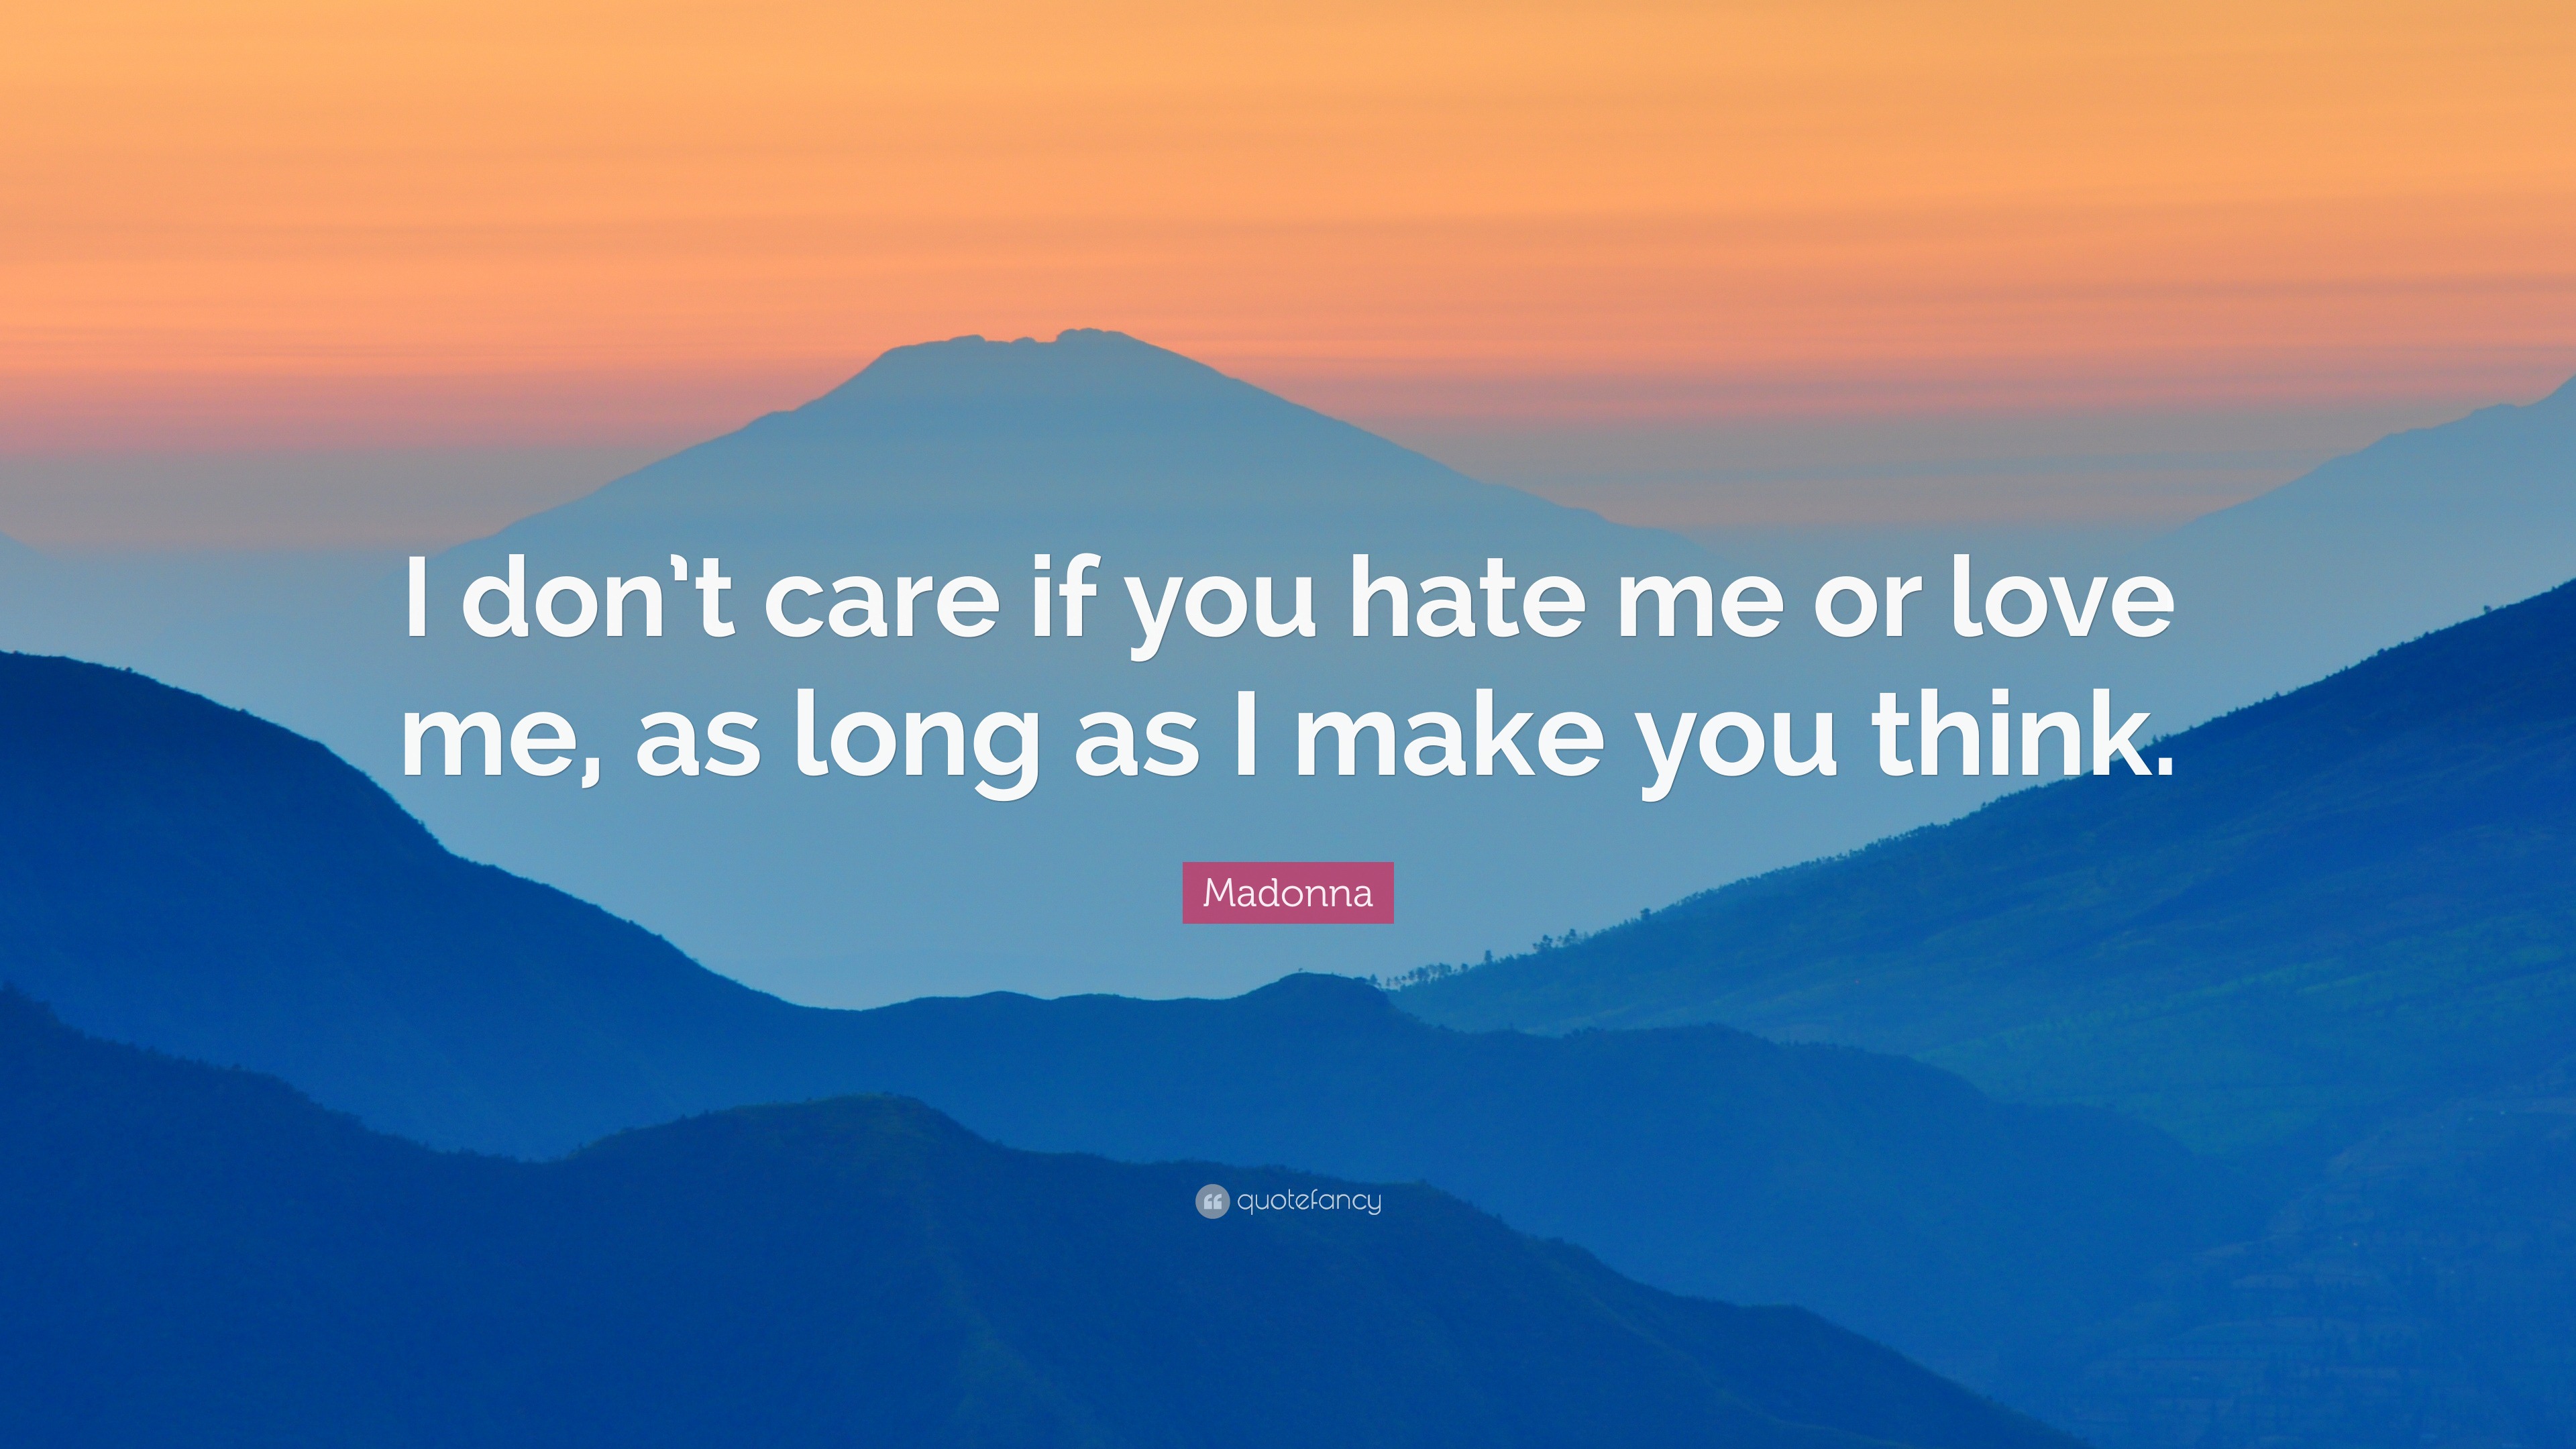 Madonna Quote “I don t care if you hate me or love me